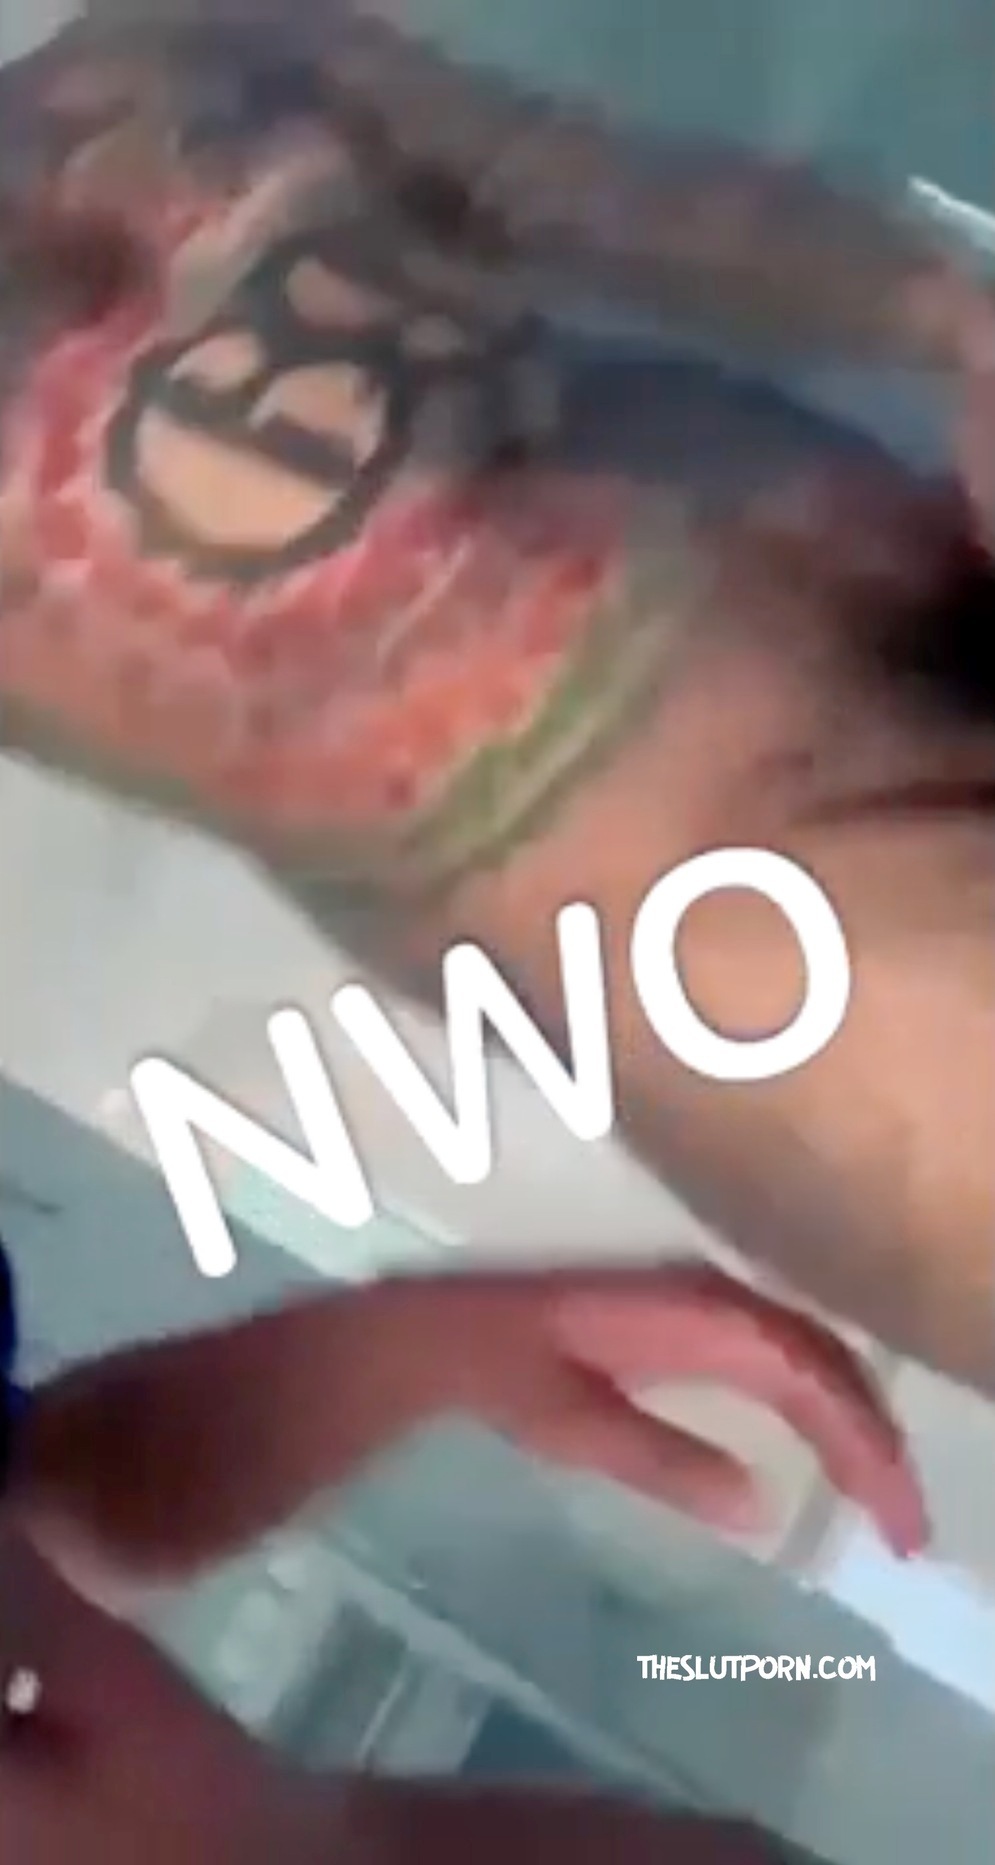 Ohsoyoujade Nude &amp; Sex Tape With 6ix9ine